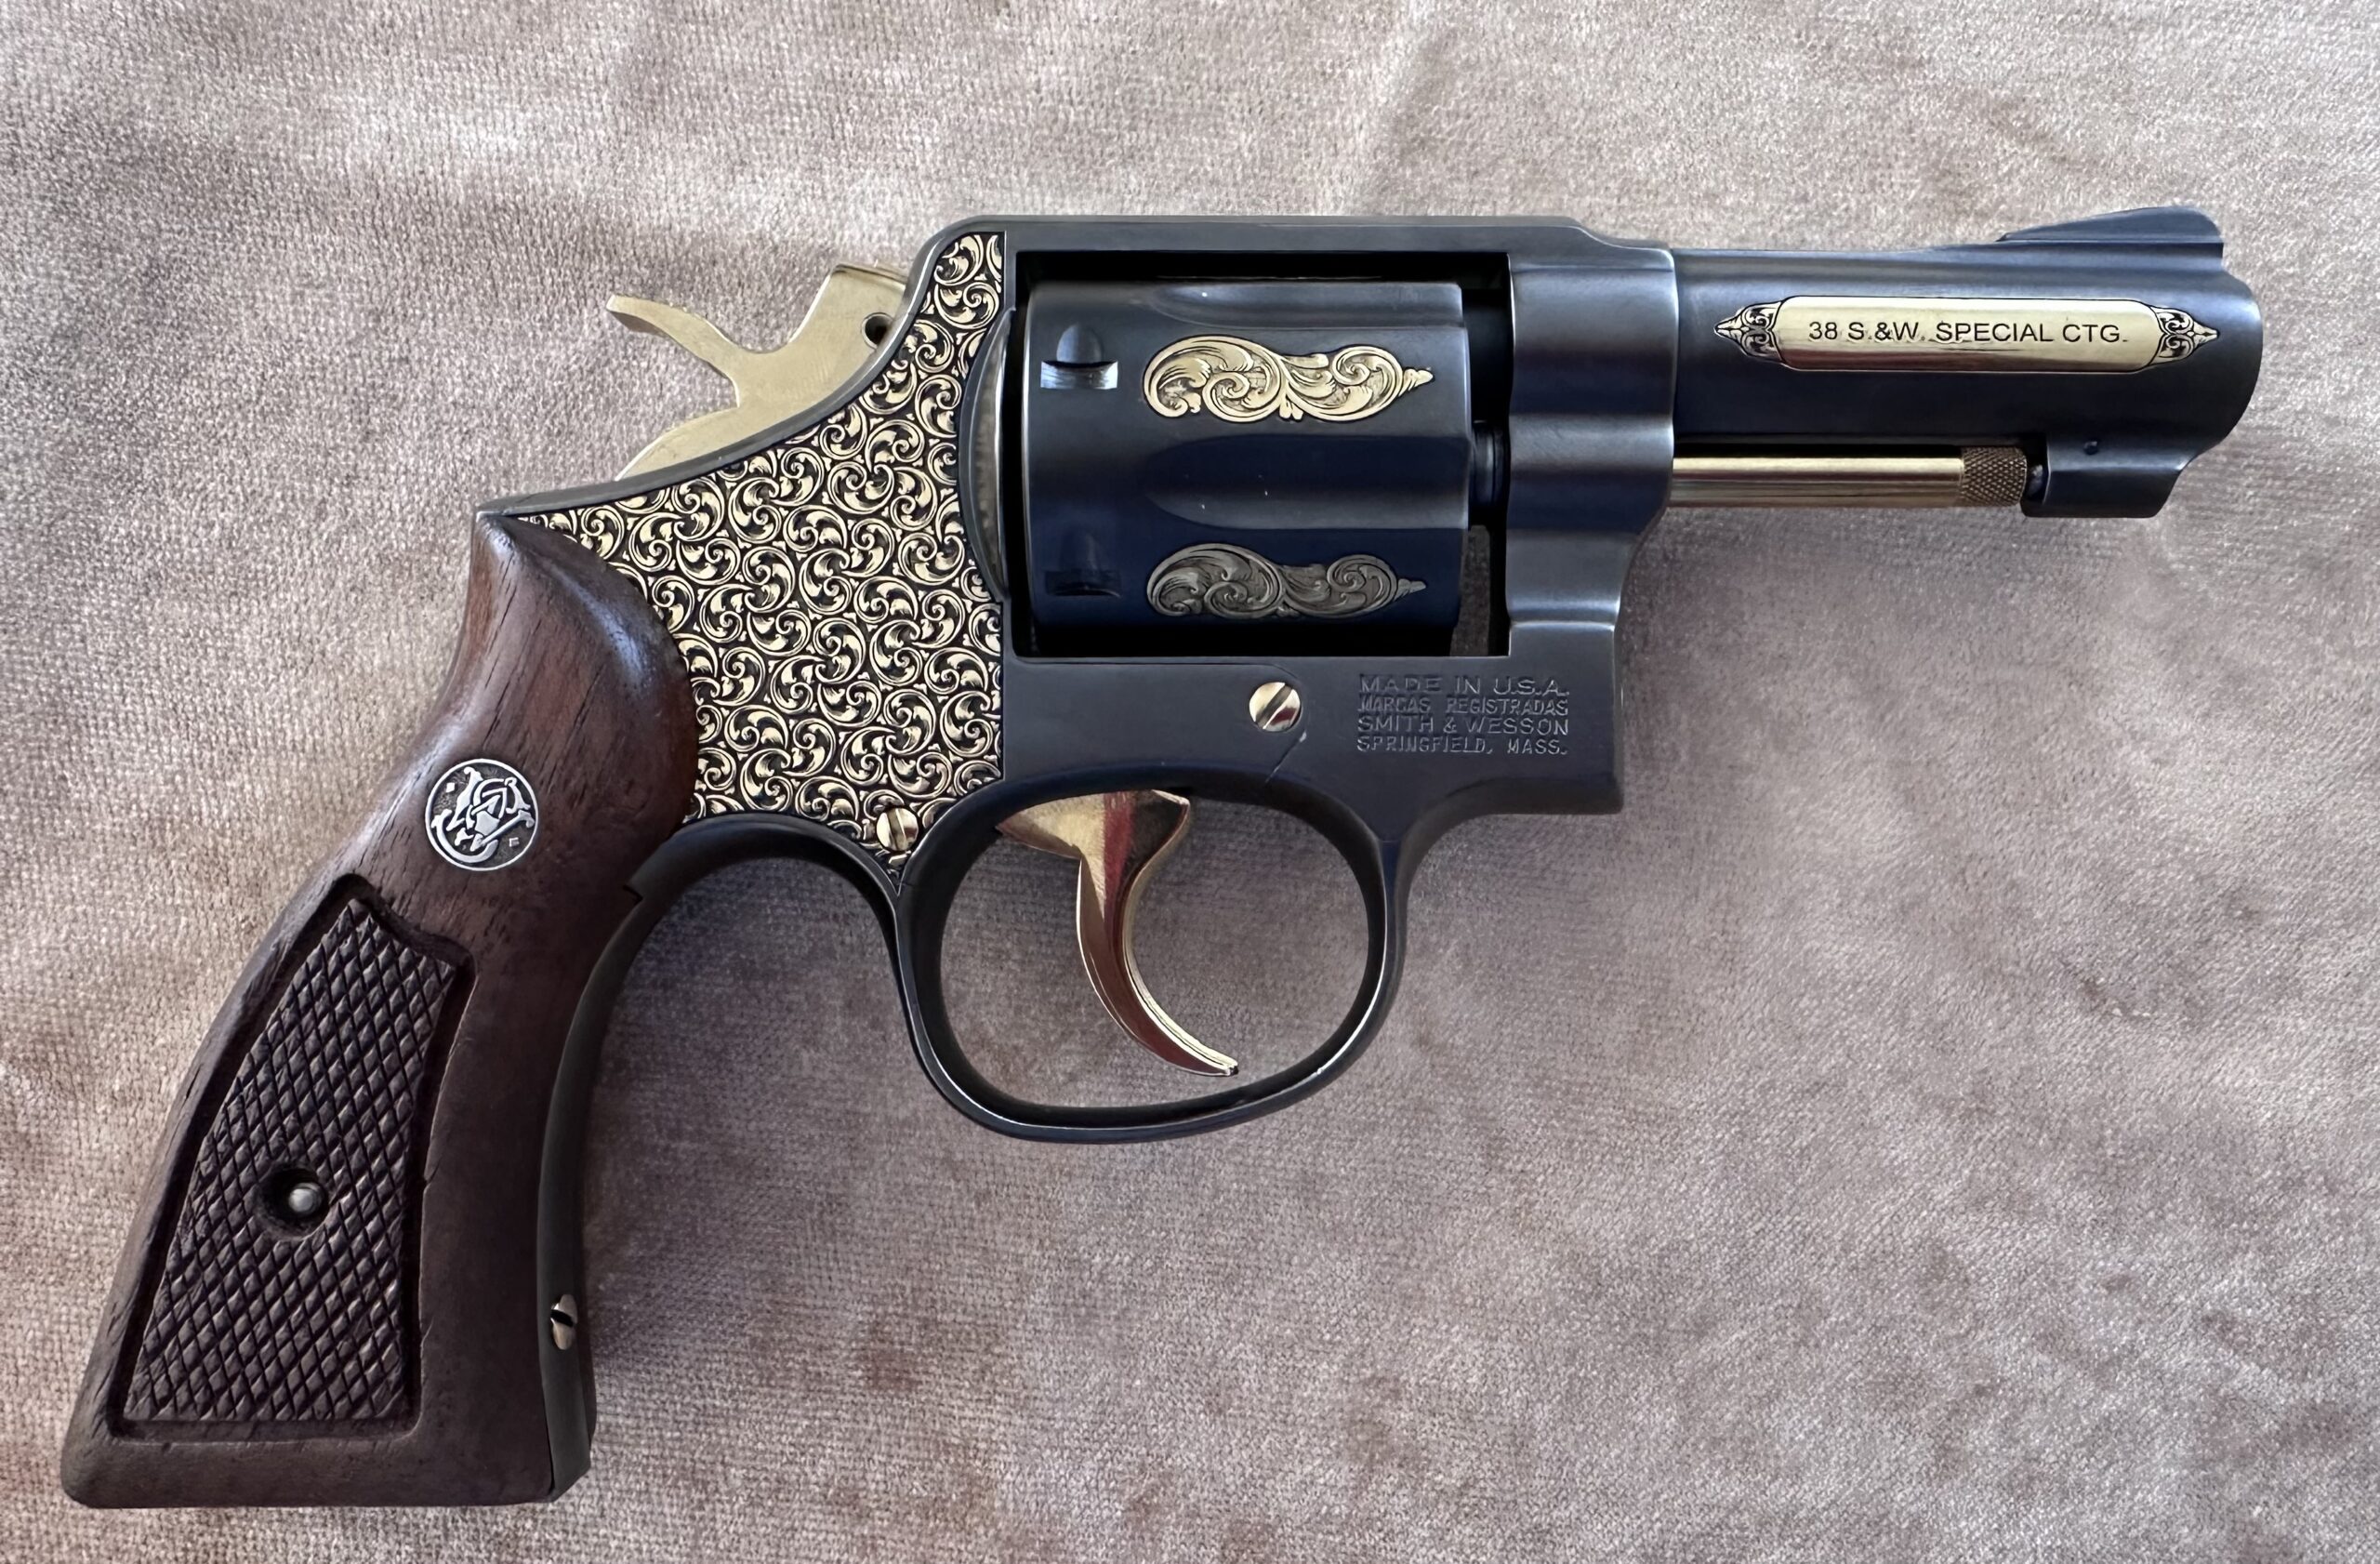 38 Cal Smith&Wesson